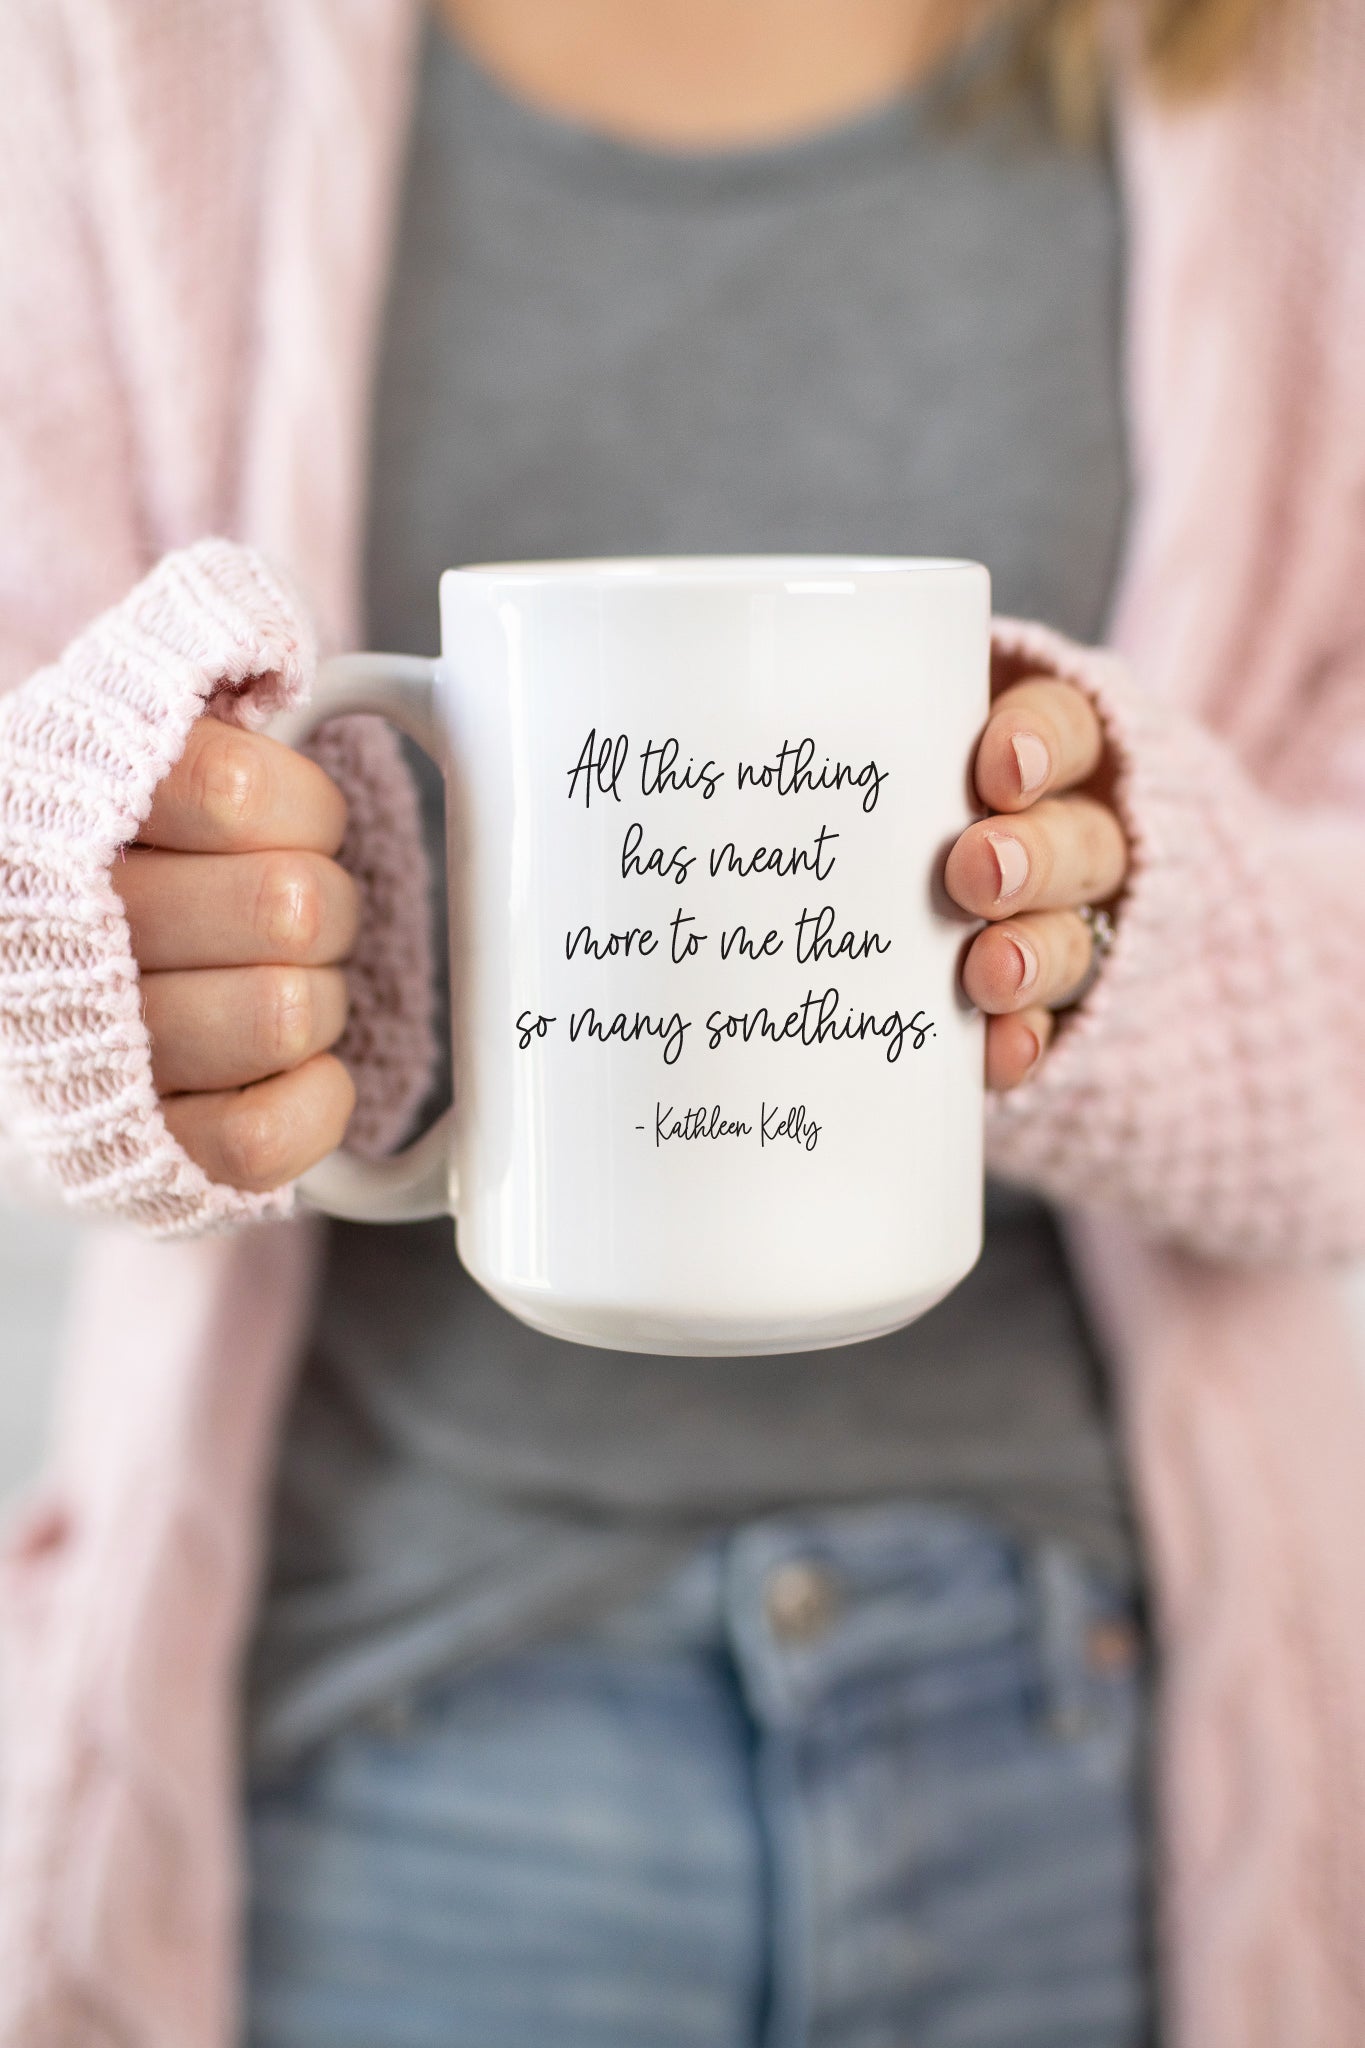 "All this nothing has meant more to me than so many somethings." - Kathleen Kelly You've Got Mail mug